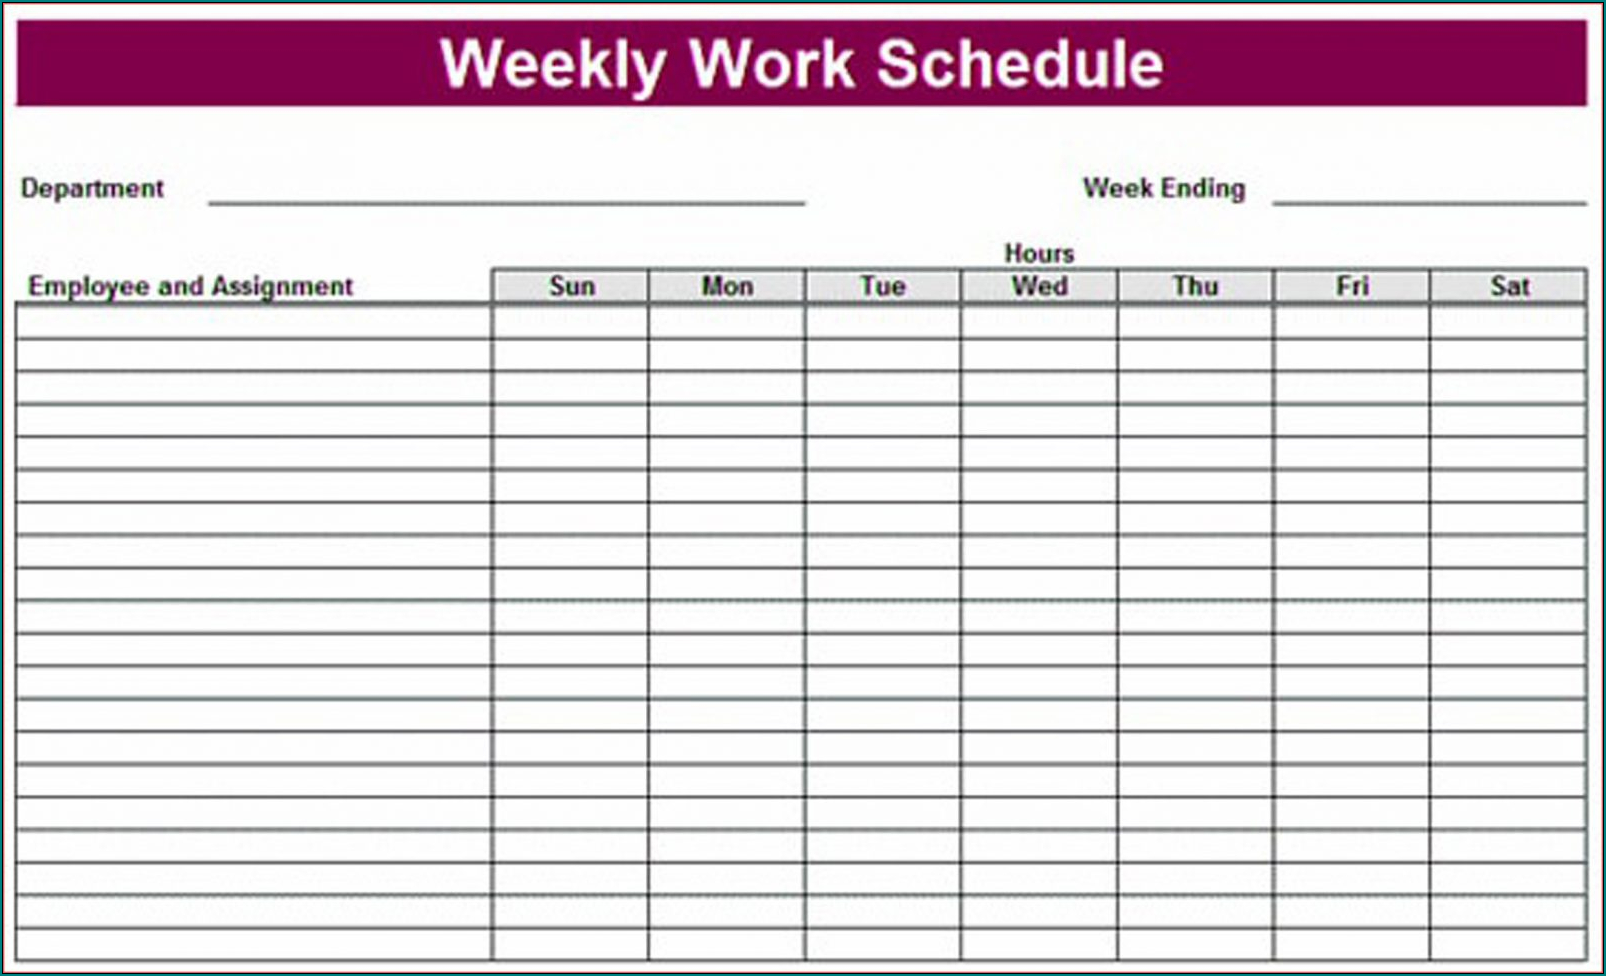 Example of Weekly Workout Schedule Template